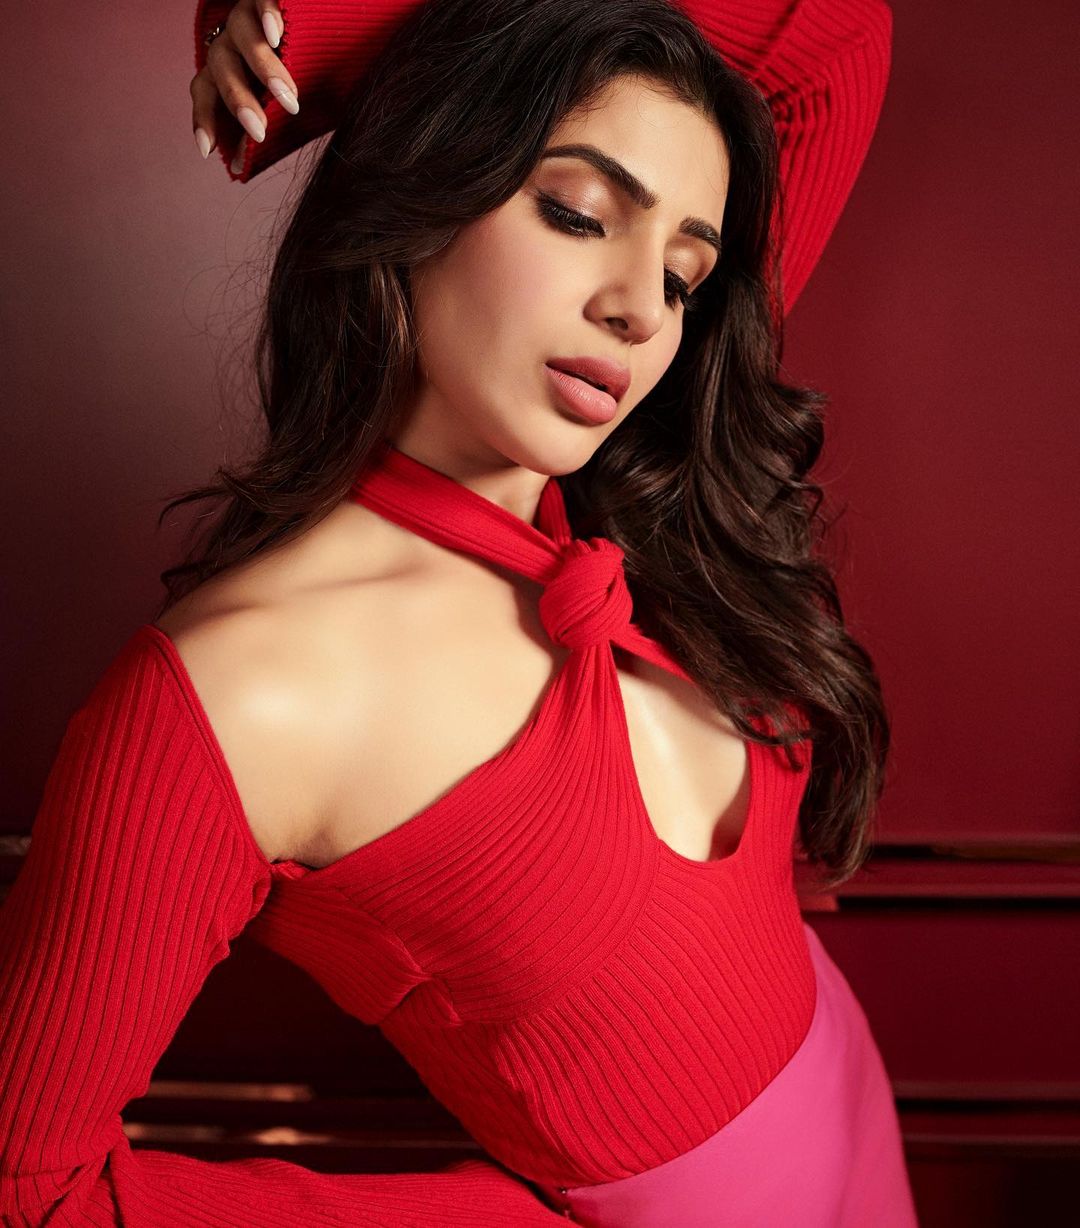 Samantha Ruth Prabhu looks sassy in the sylish red top and pink trousers